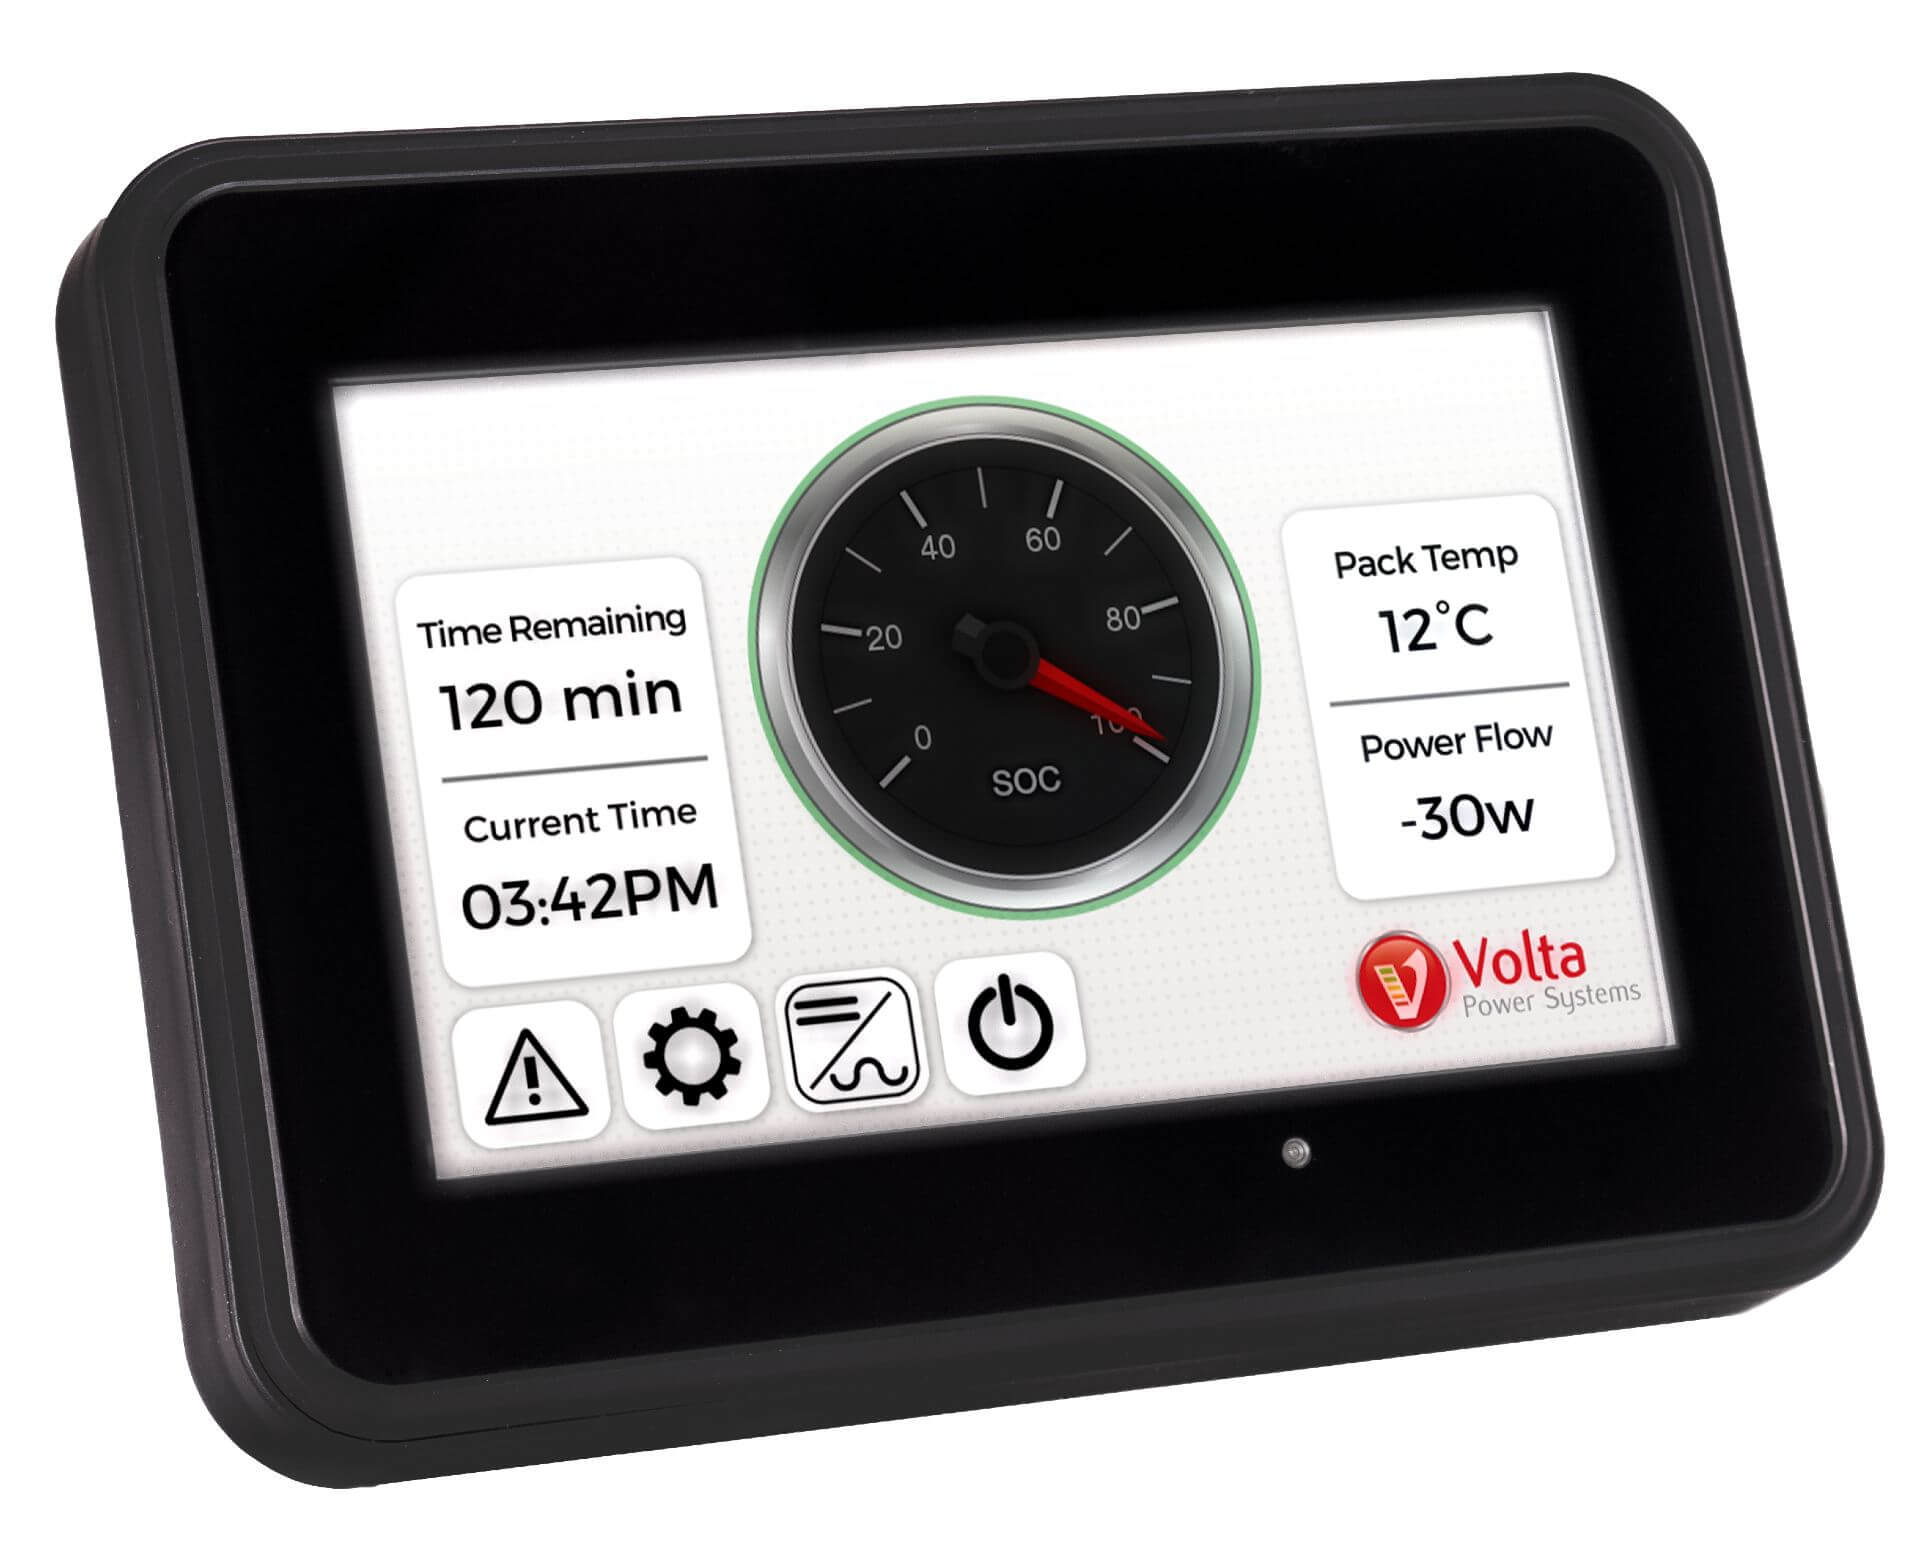 Volta Power System Releases Low-Profile Inverter and All-in-One Control